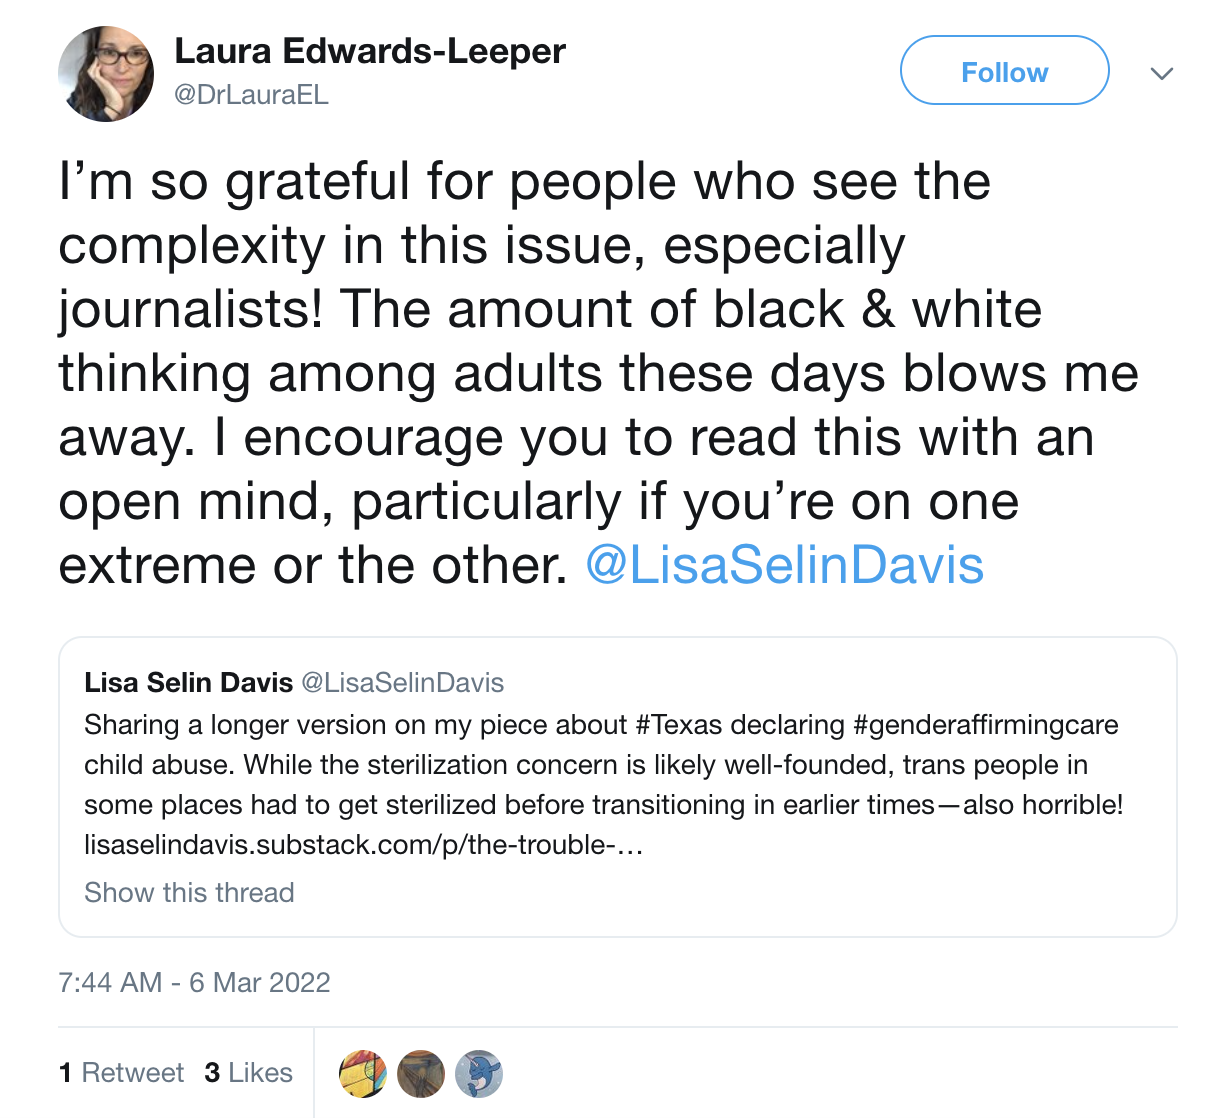 A screenshot from twitter. Text: 'I’m so grateful for people who see the complexity in this issue, especially journalists! The amount of black & white thinking among adults these days blows me away. I encourage you to read this with an open mind, particularly if you’re on one extreme or the other.' 